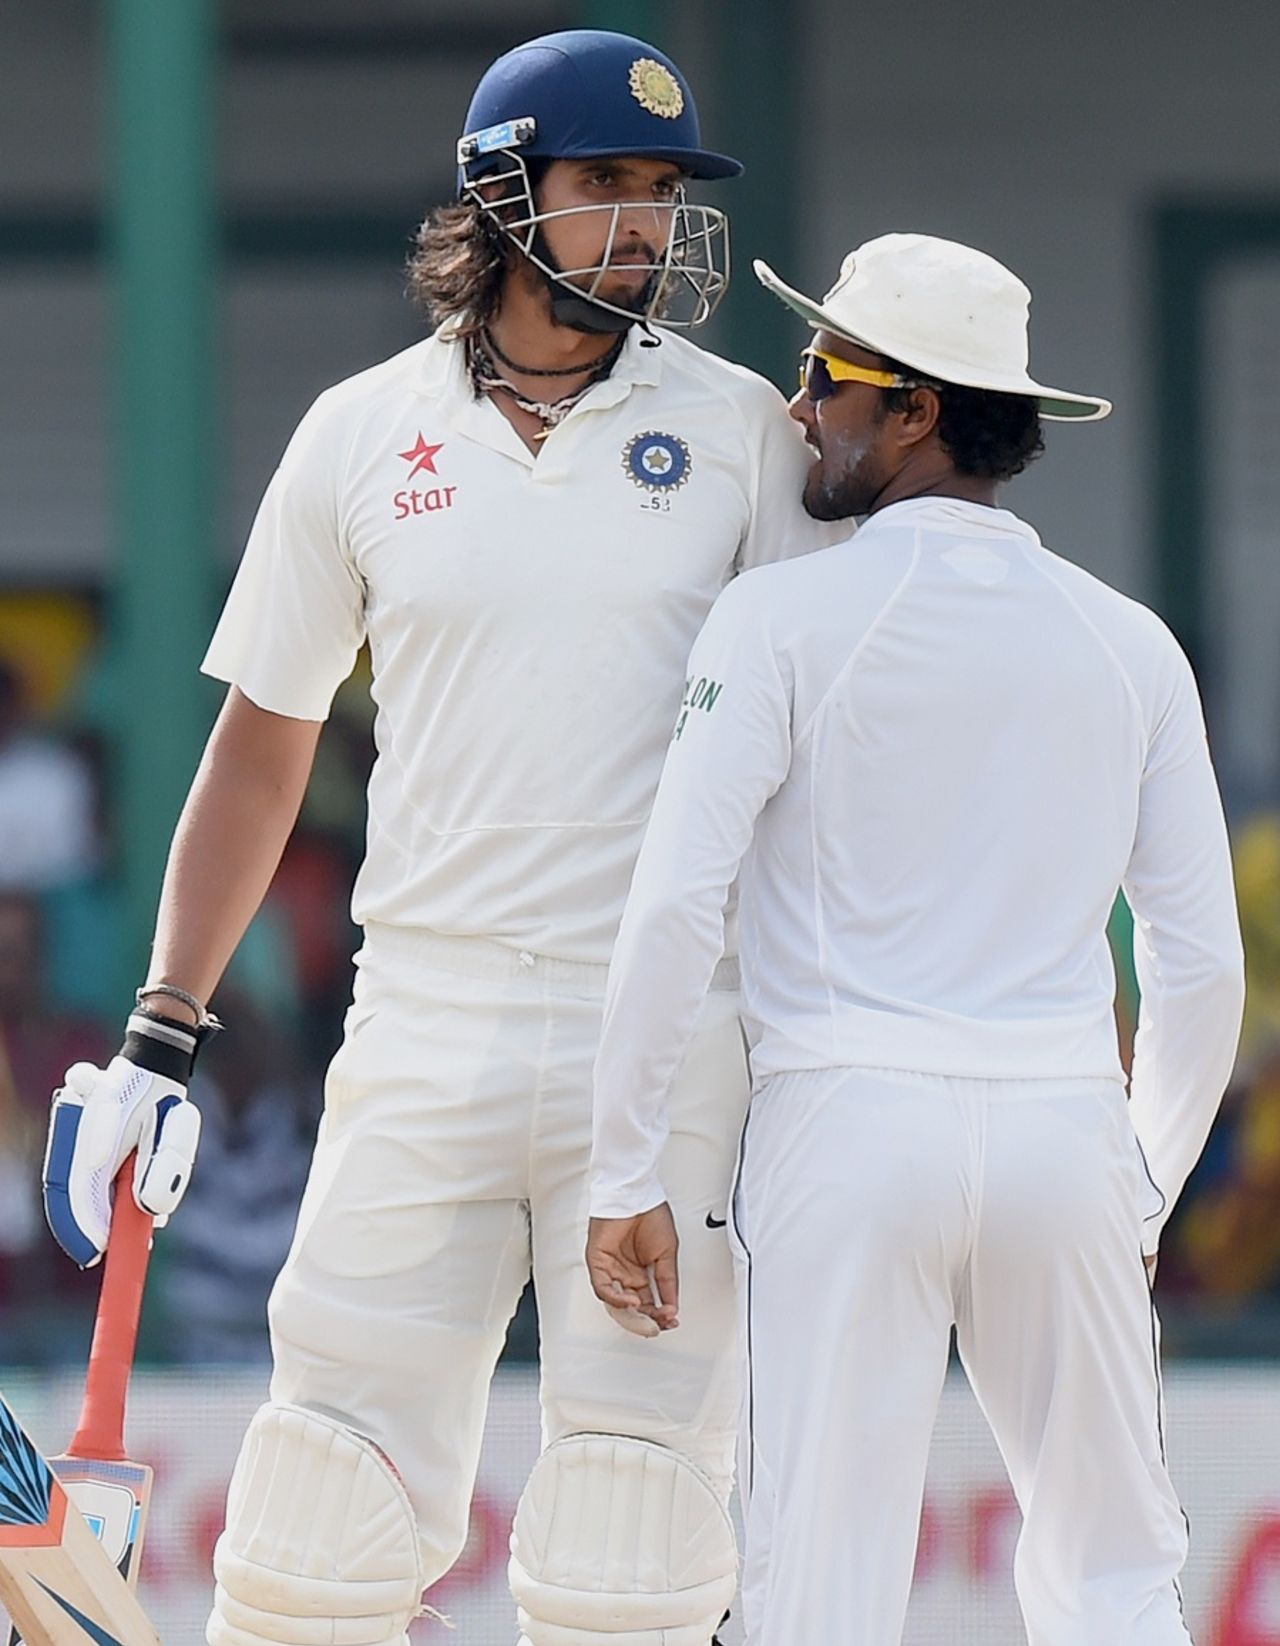 Tempers flare: Ishant Sharma and Dinesh Chandimal got into an altercation, Sri Lanka v India, 3rd Test, SSC, Colombo, 4th day, August 31, 2015